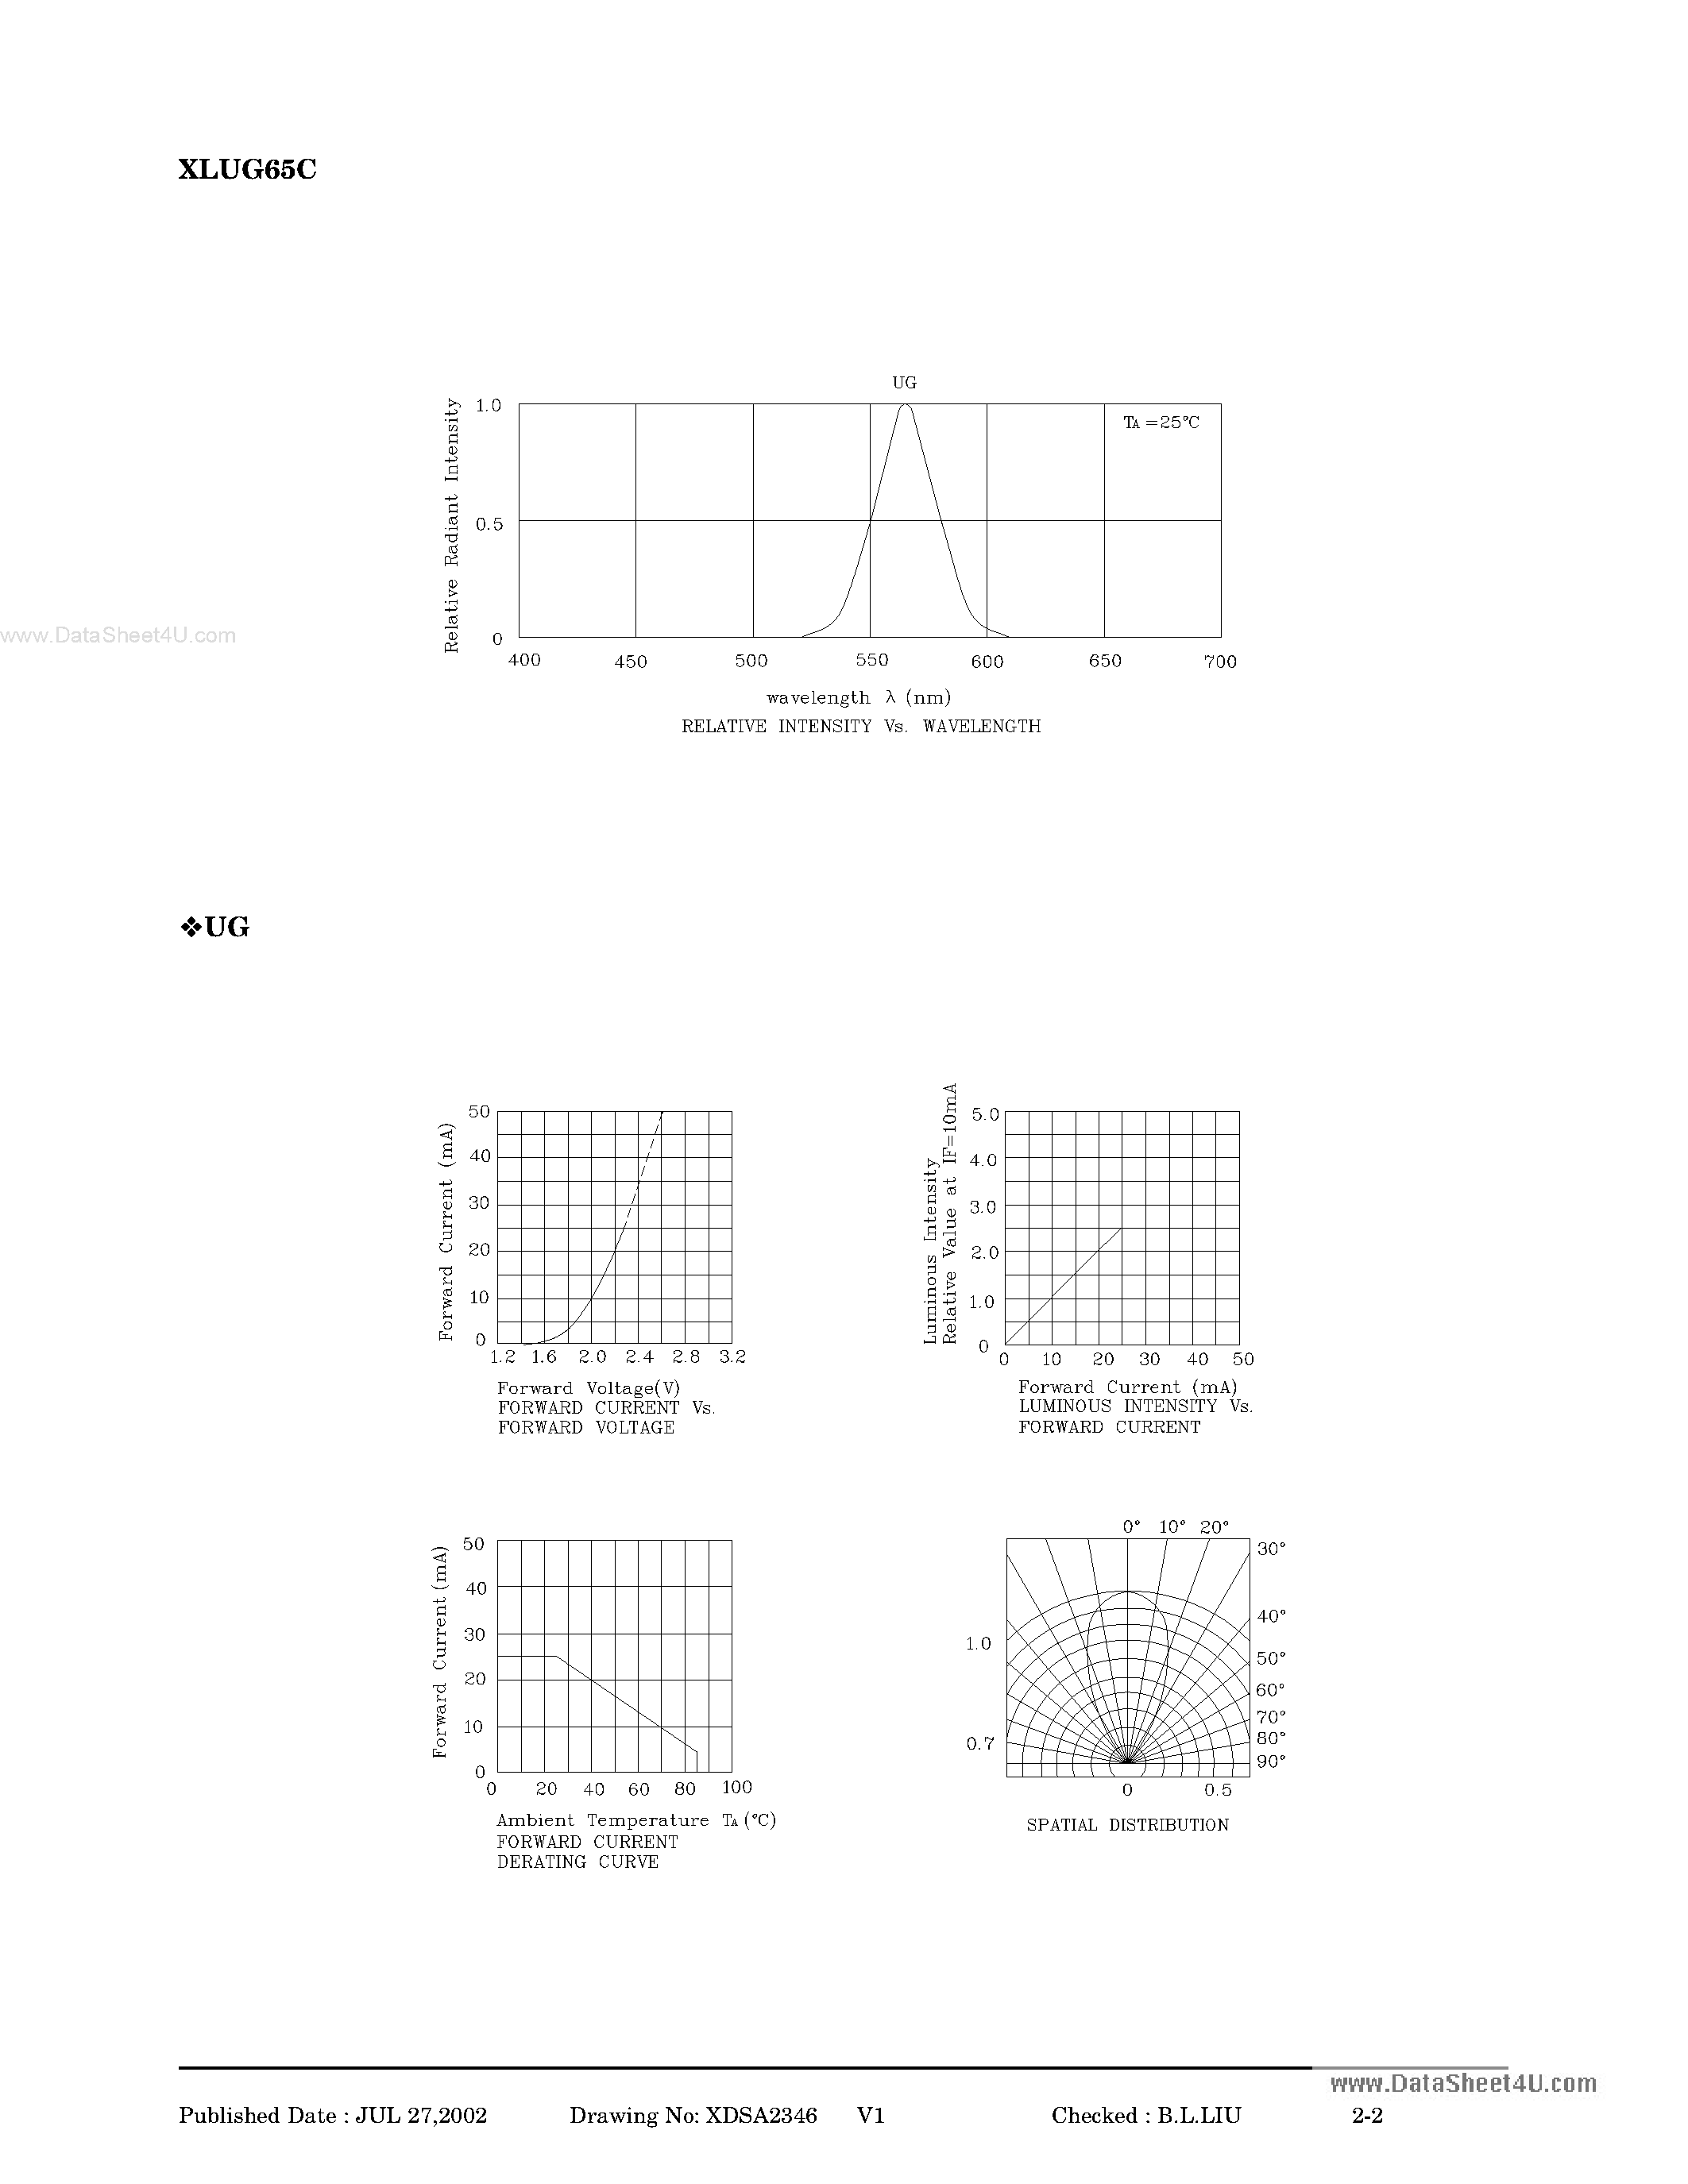 Datasheet XLUG65C - T-1 (3mm) SOLID STATE LAMP page 2